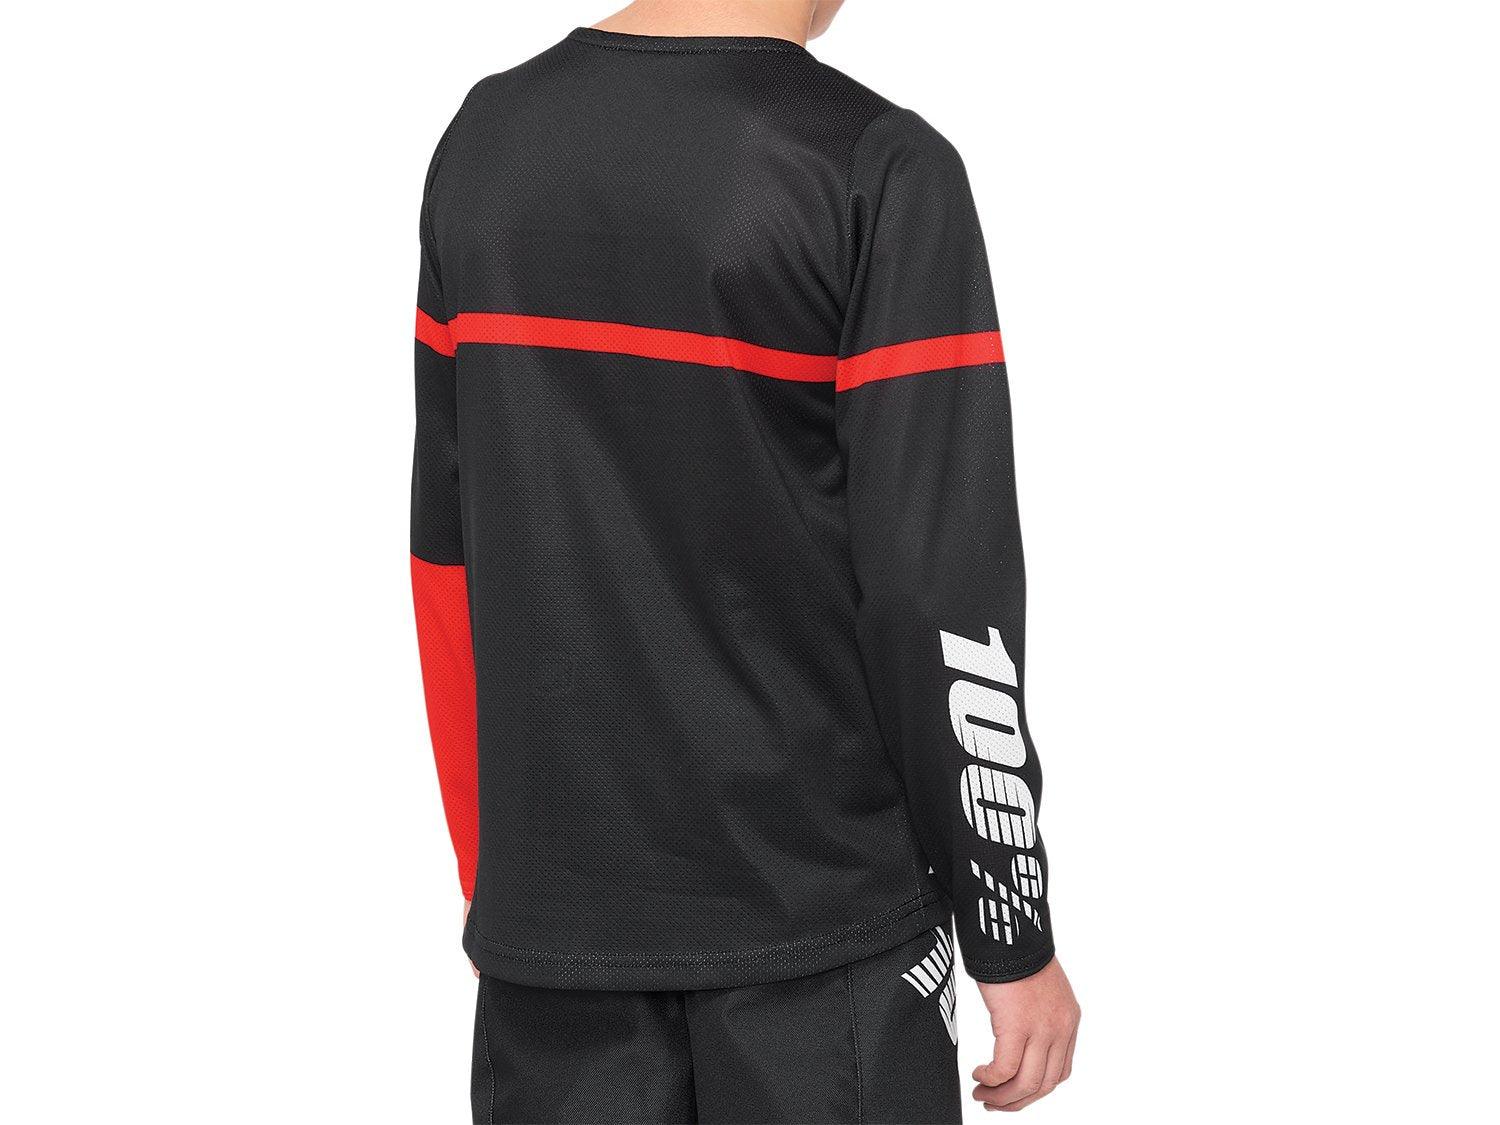 100% R Core DH Youth Jersey - Liquid-Life